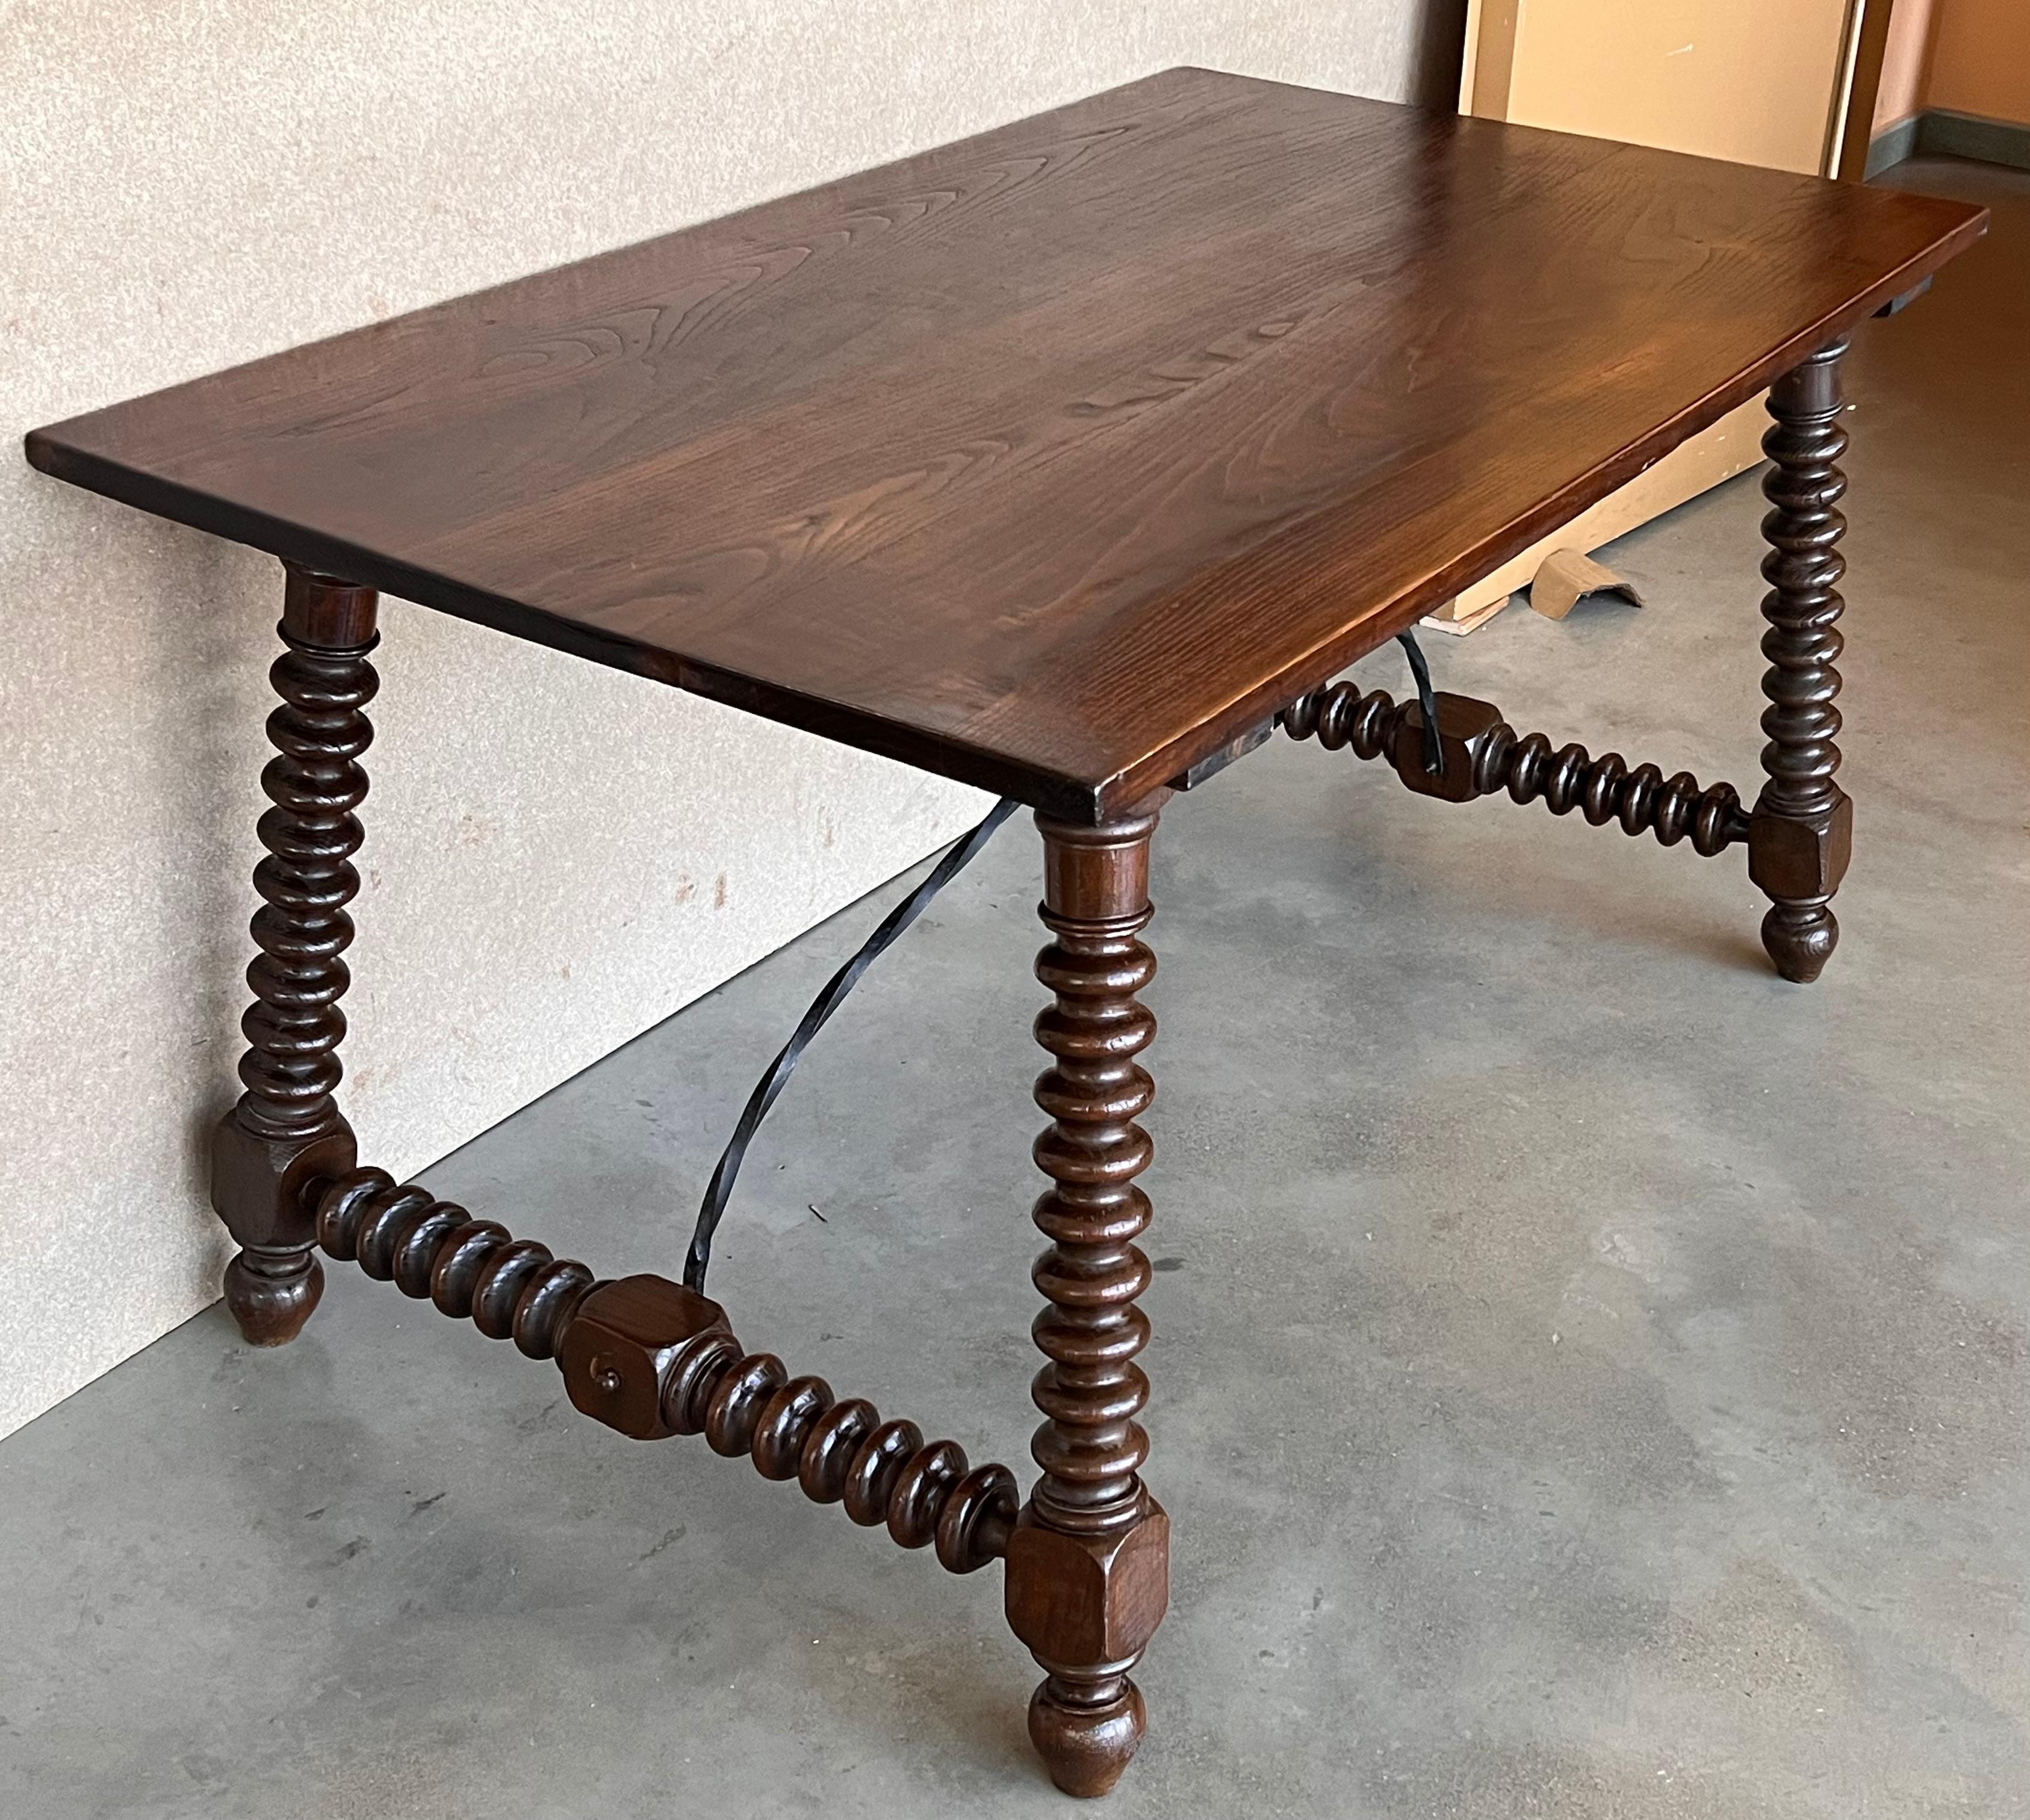 19th Century 19th Spanish Writing or Center Table with Carved Turned Legs and Wood Stretcher